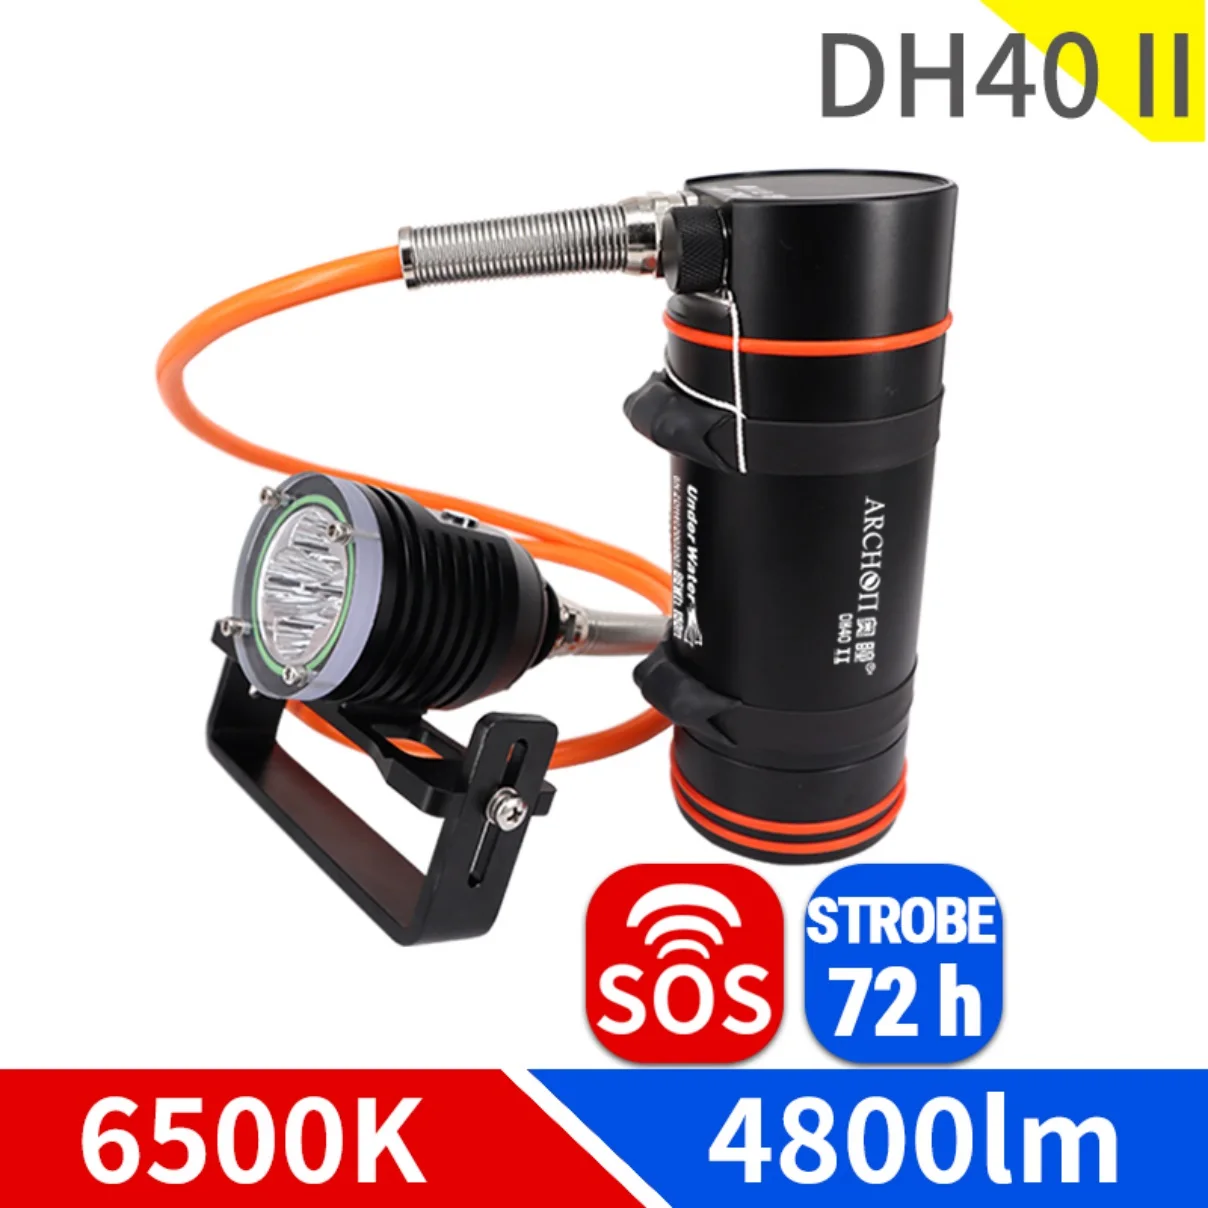 ARCHON DH40 II Diving Light CREE SST-20 LED 6500K Diving Flashlight Strobe SOS Lighting Torch Photography Video Dive Fill Light enlarge